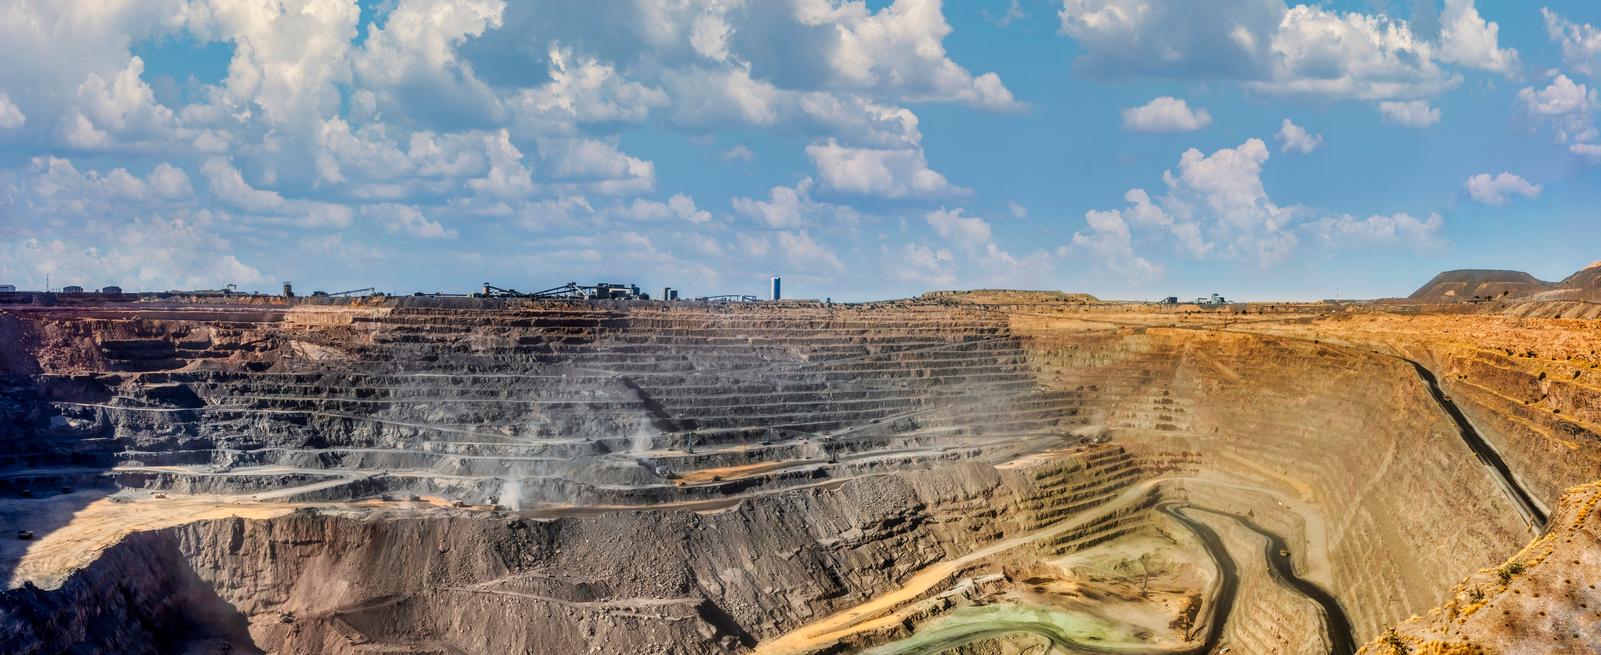 A wide angle view of a diamond mining pit on a partially cloudy day. 